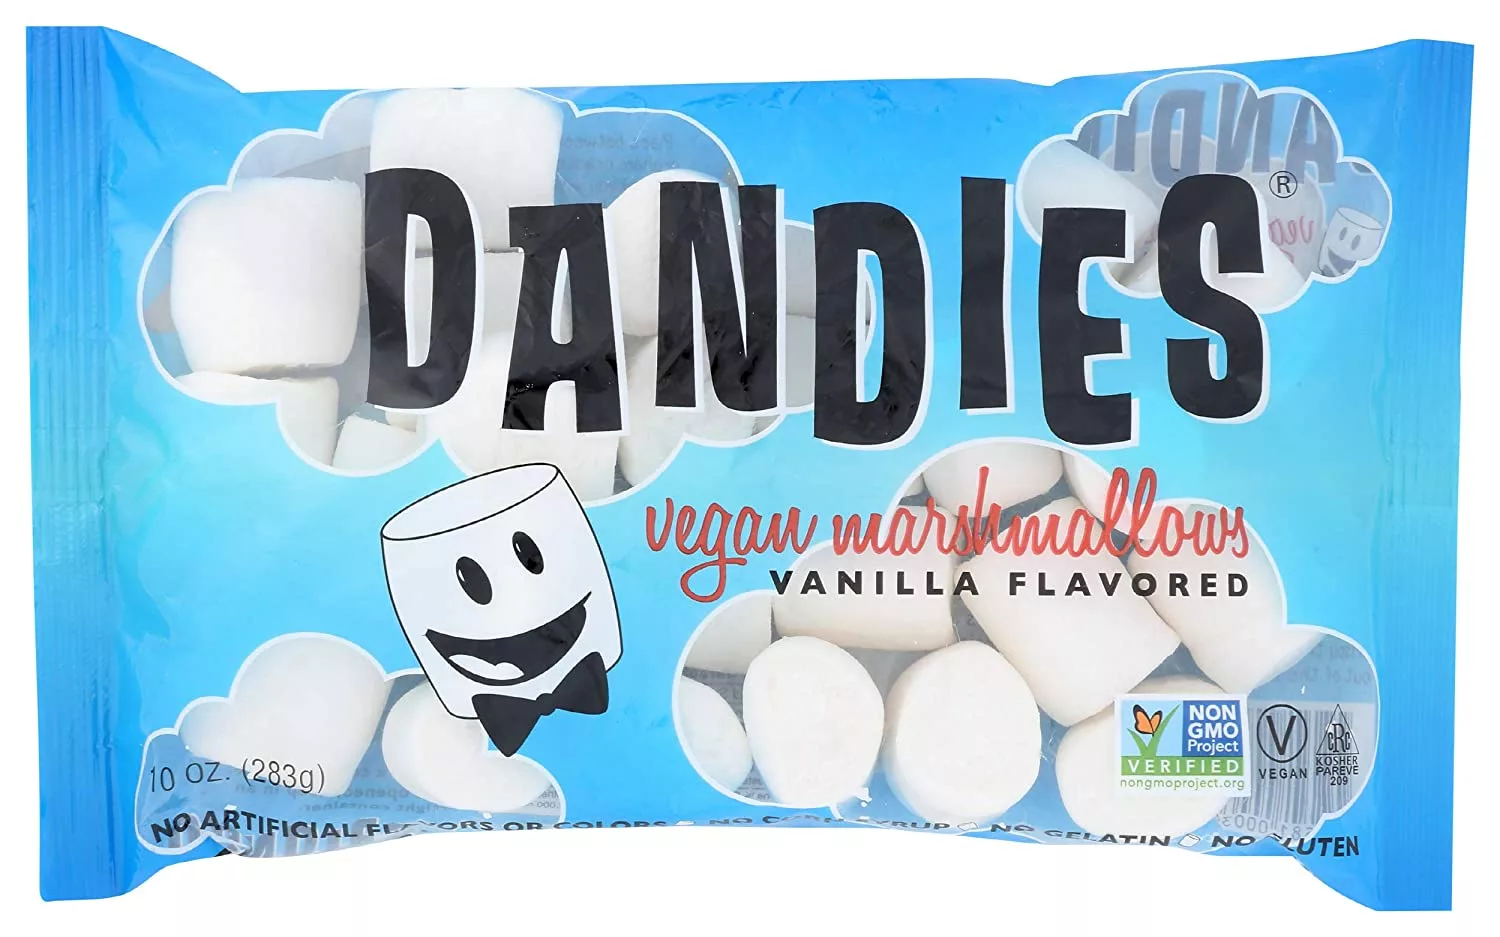 Dandies manufactures both regular-sized and miniature marshmallows. Given its popularity, this brand is probably the easiest to locate.